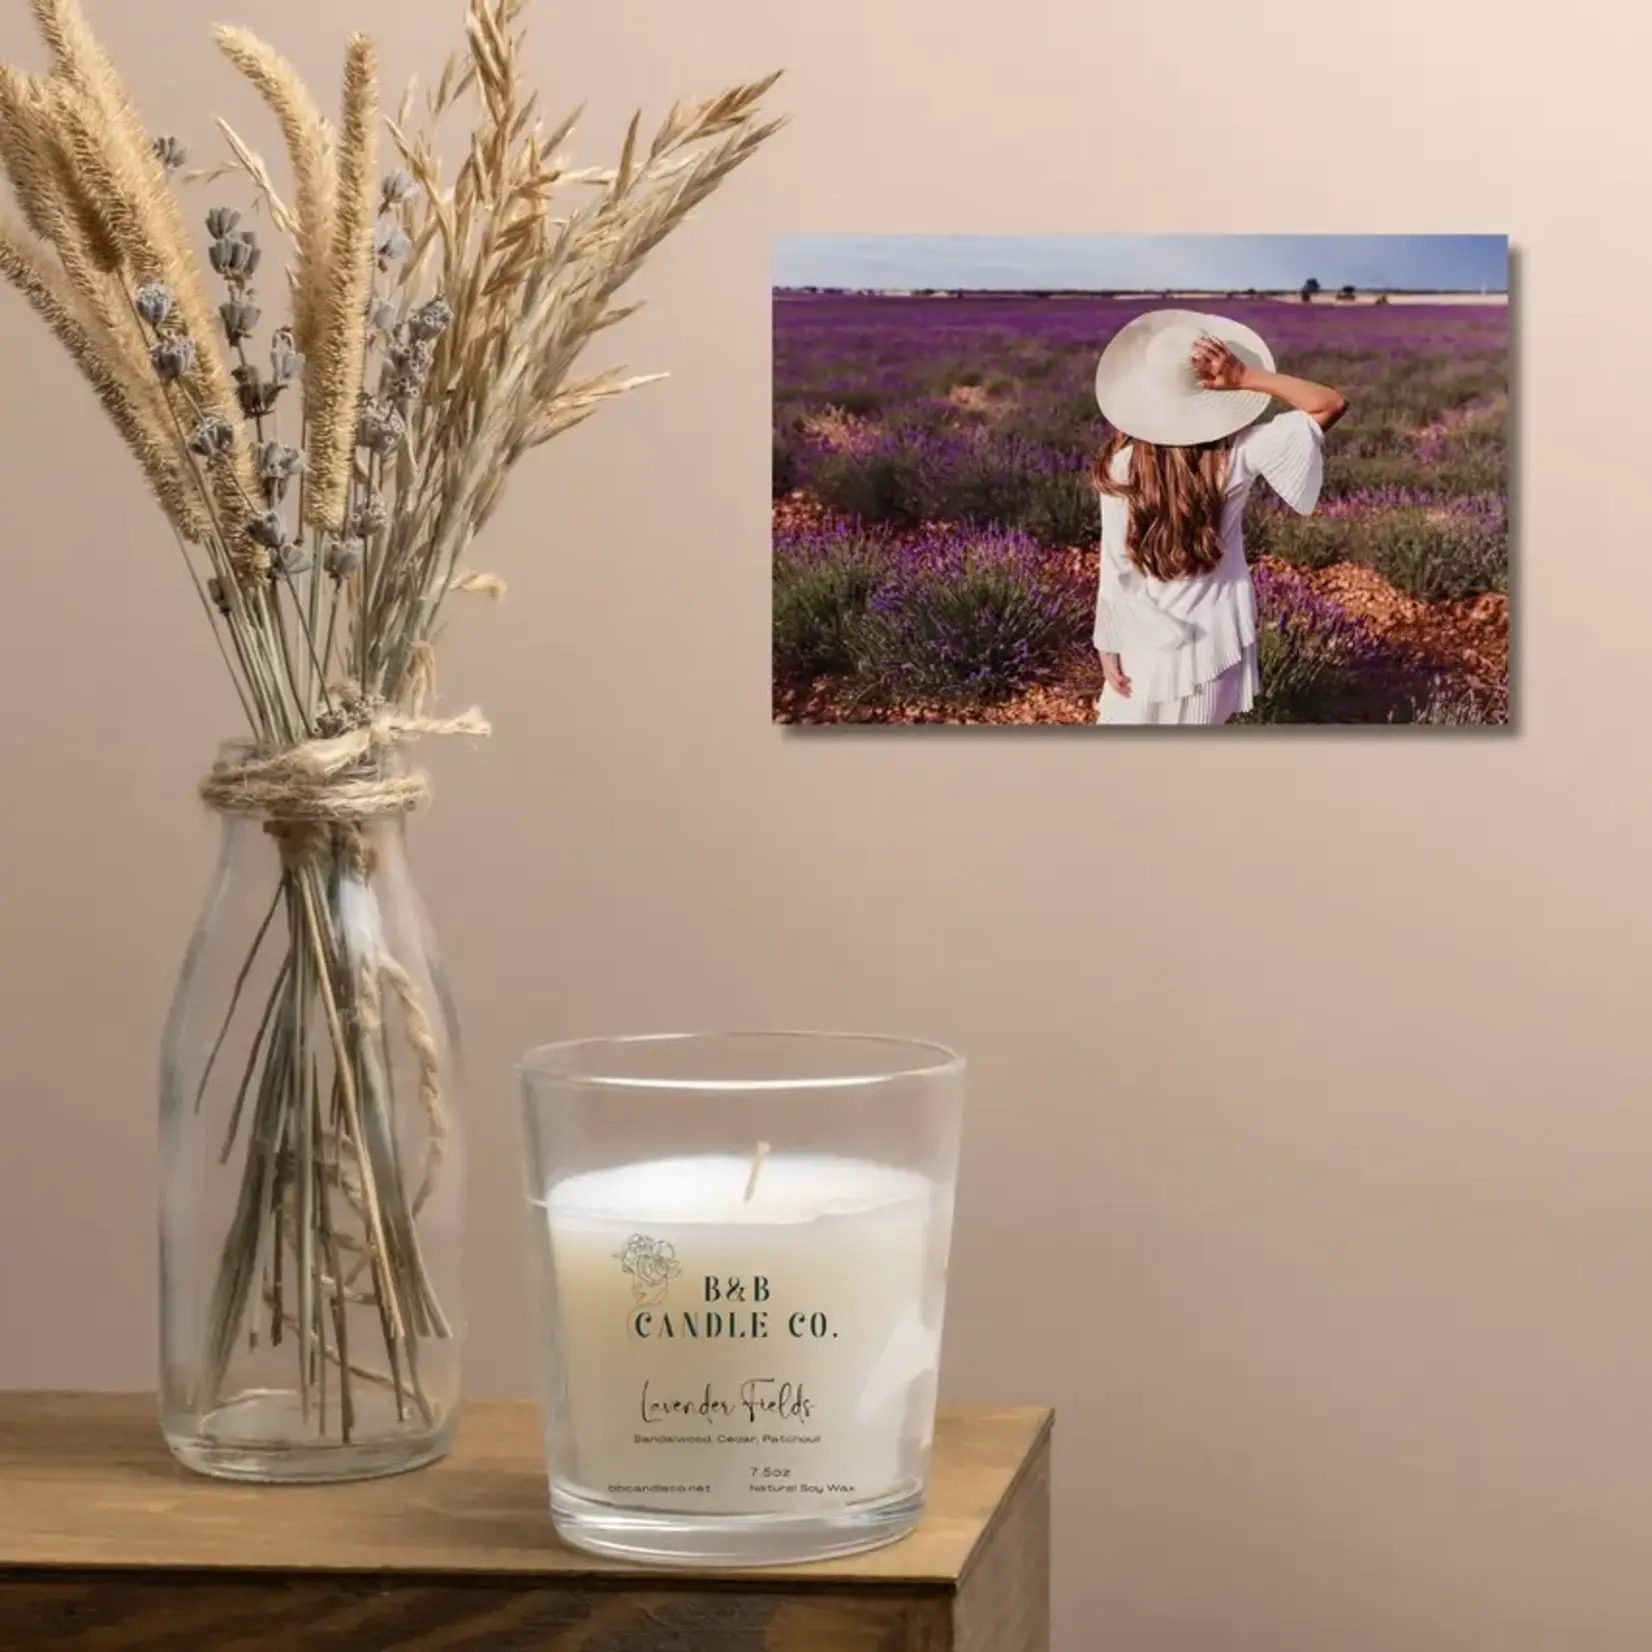 B&B Candle Co Lavender Fields Candle